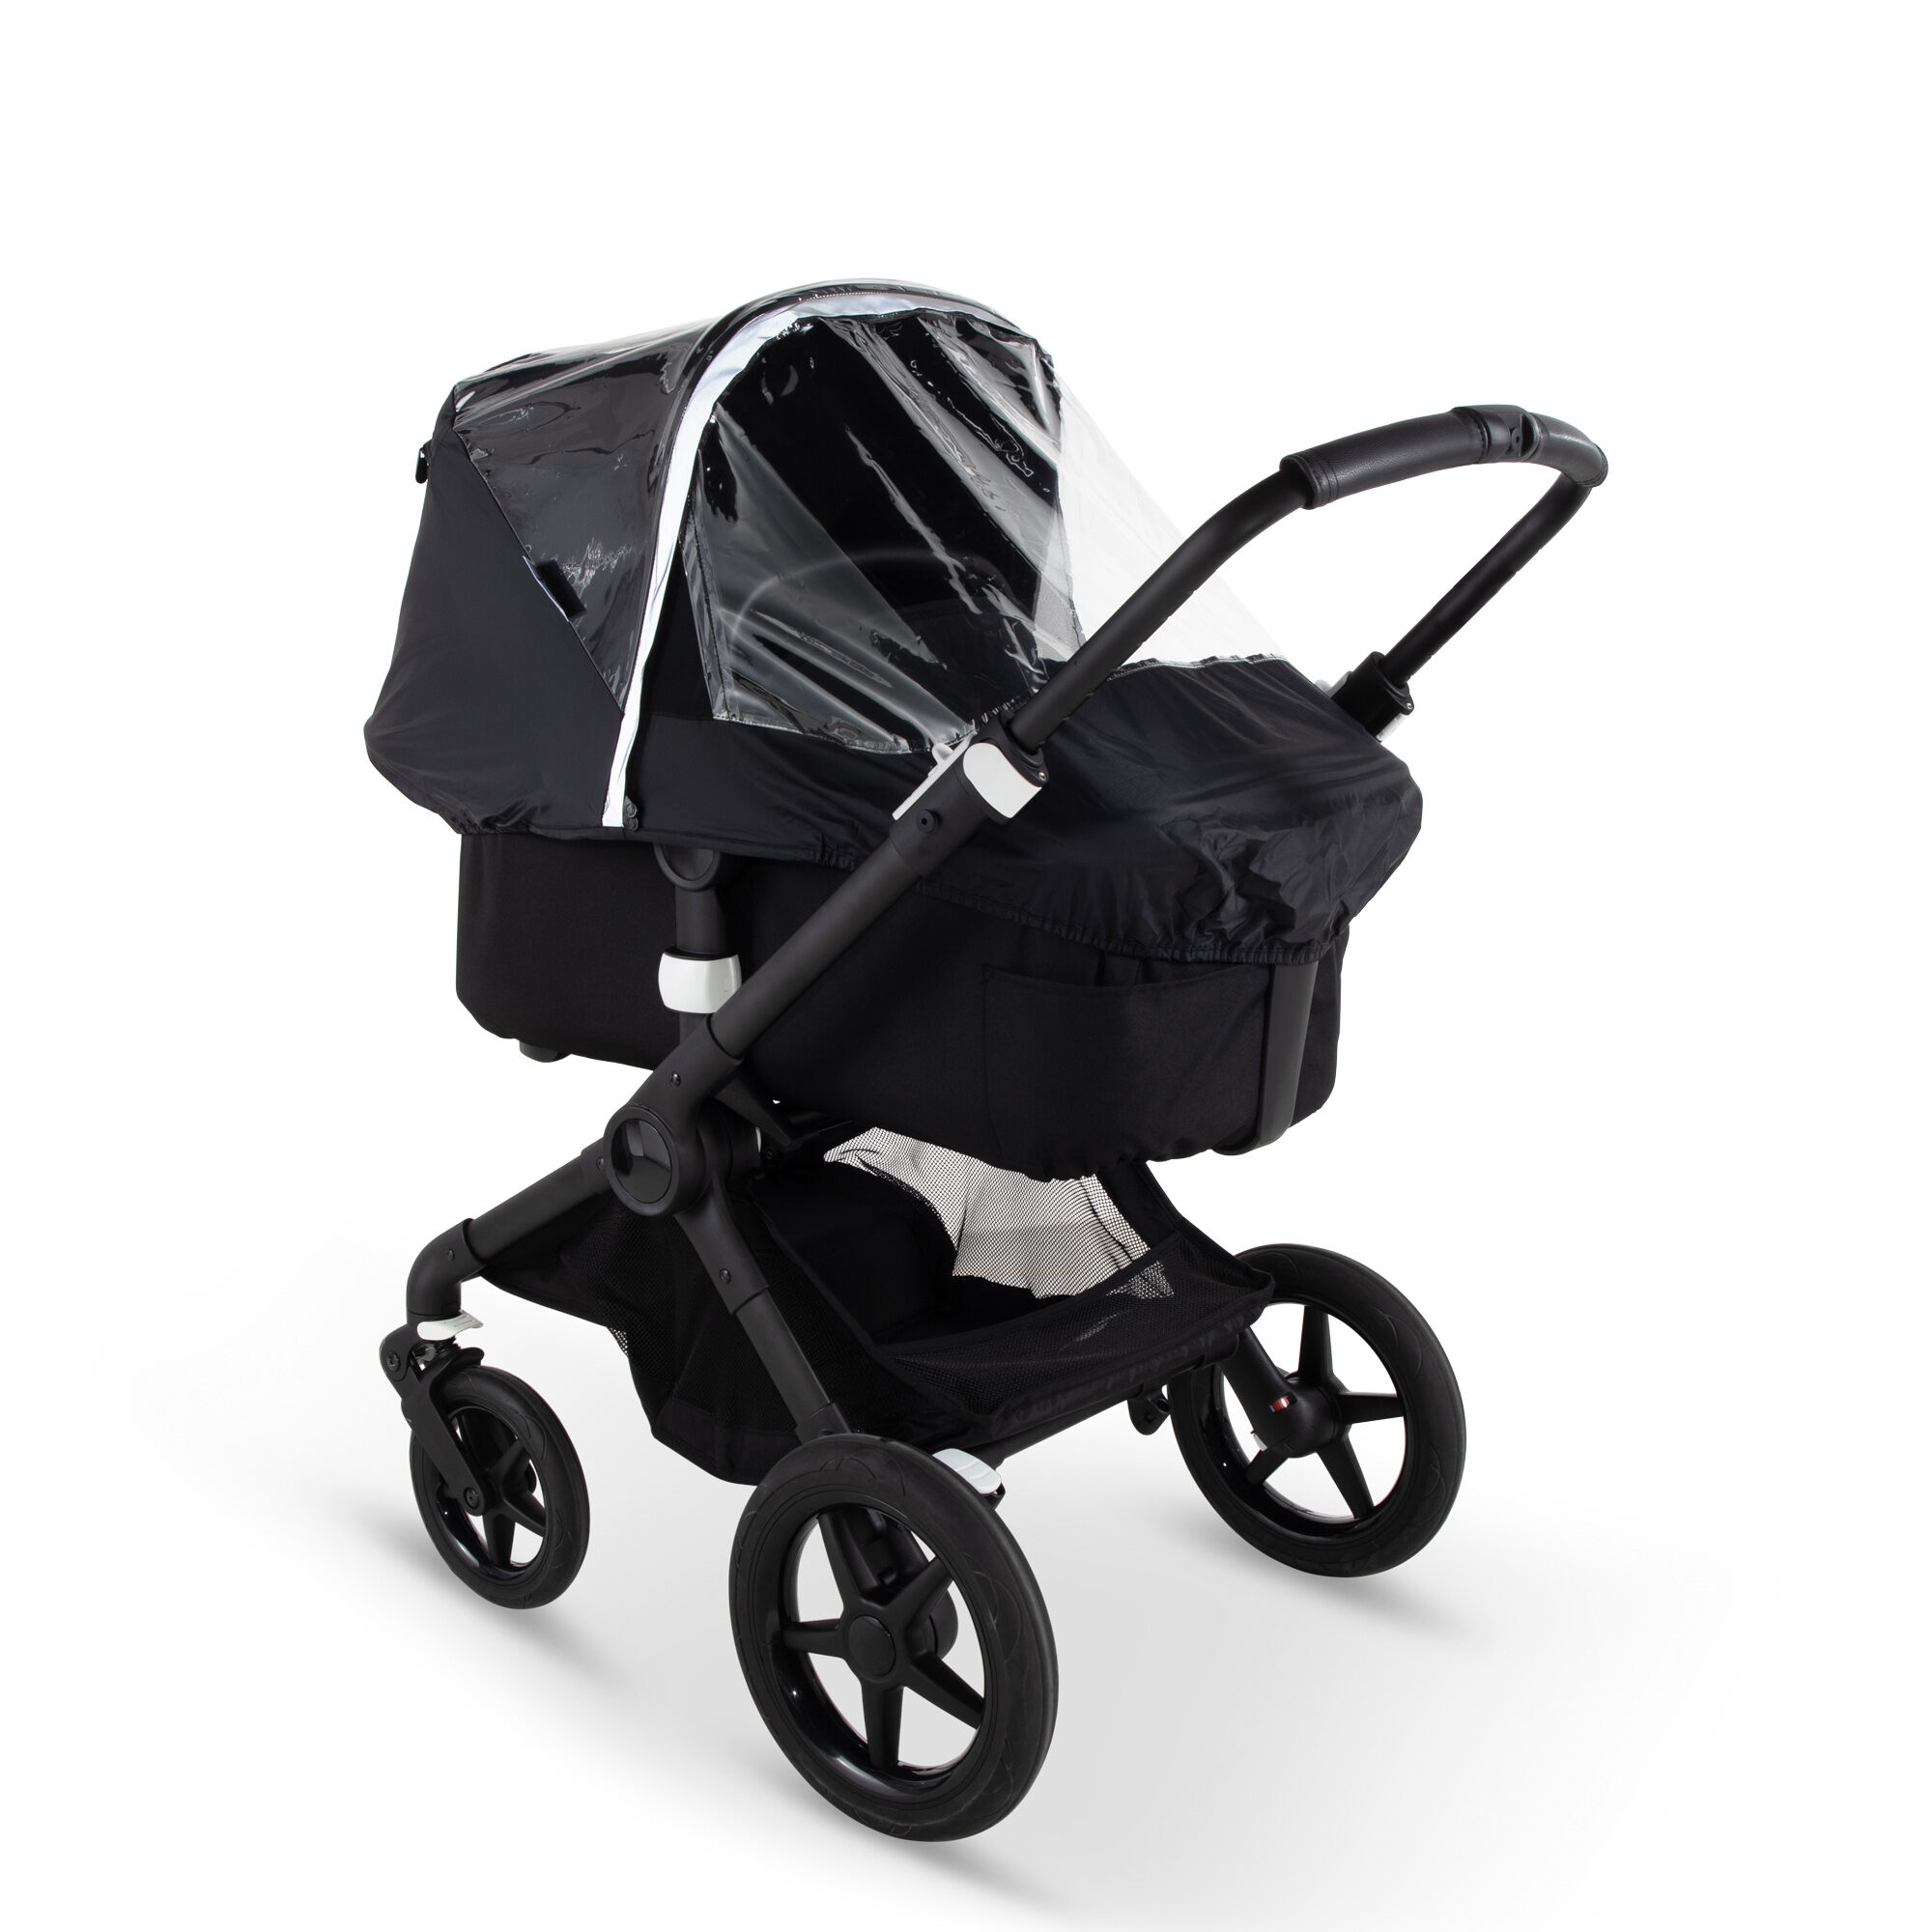 New RAINCOVER Zipped to fit Bugaboo Cameleon Carrycot & Pushchair Seat Unit 